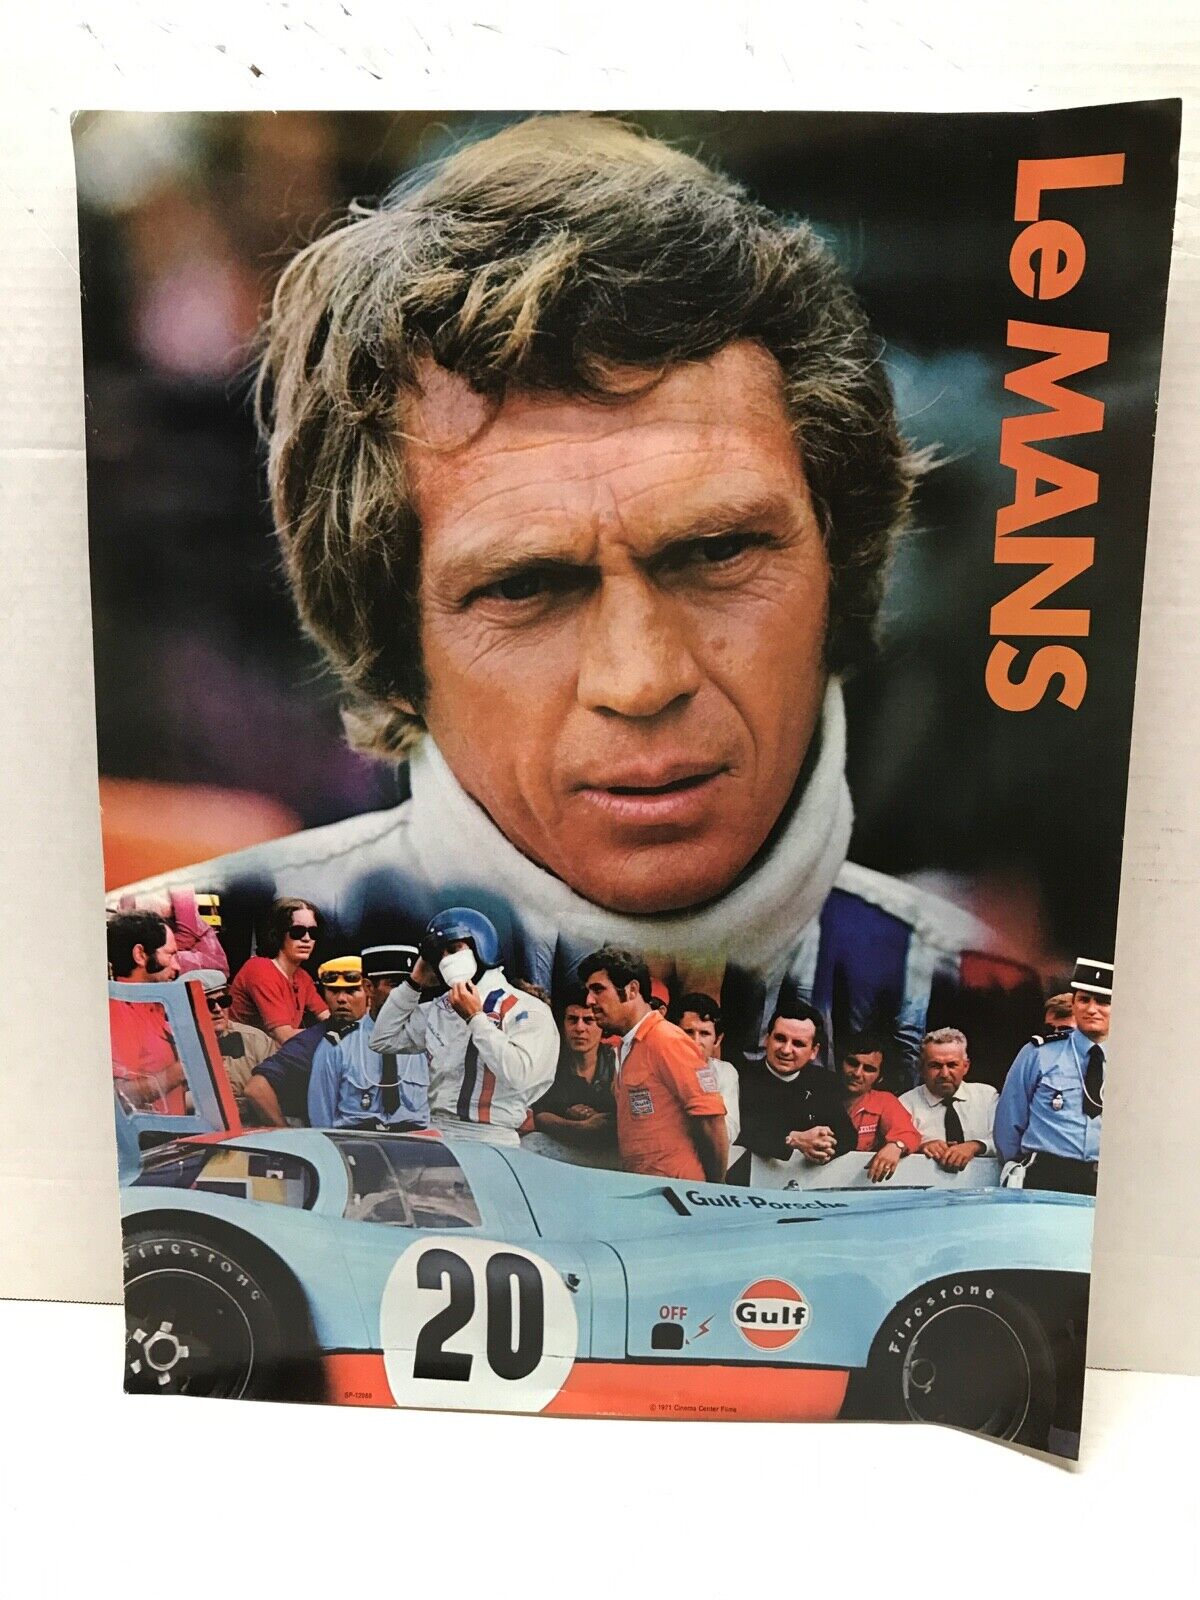  24 HOURS AT LEMANS GULF STEVE MCQEEN MOVIE POSTER 1971 